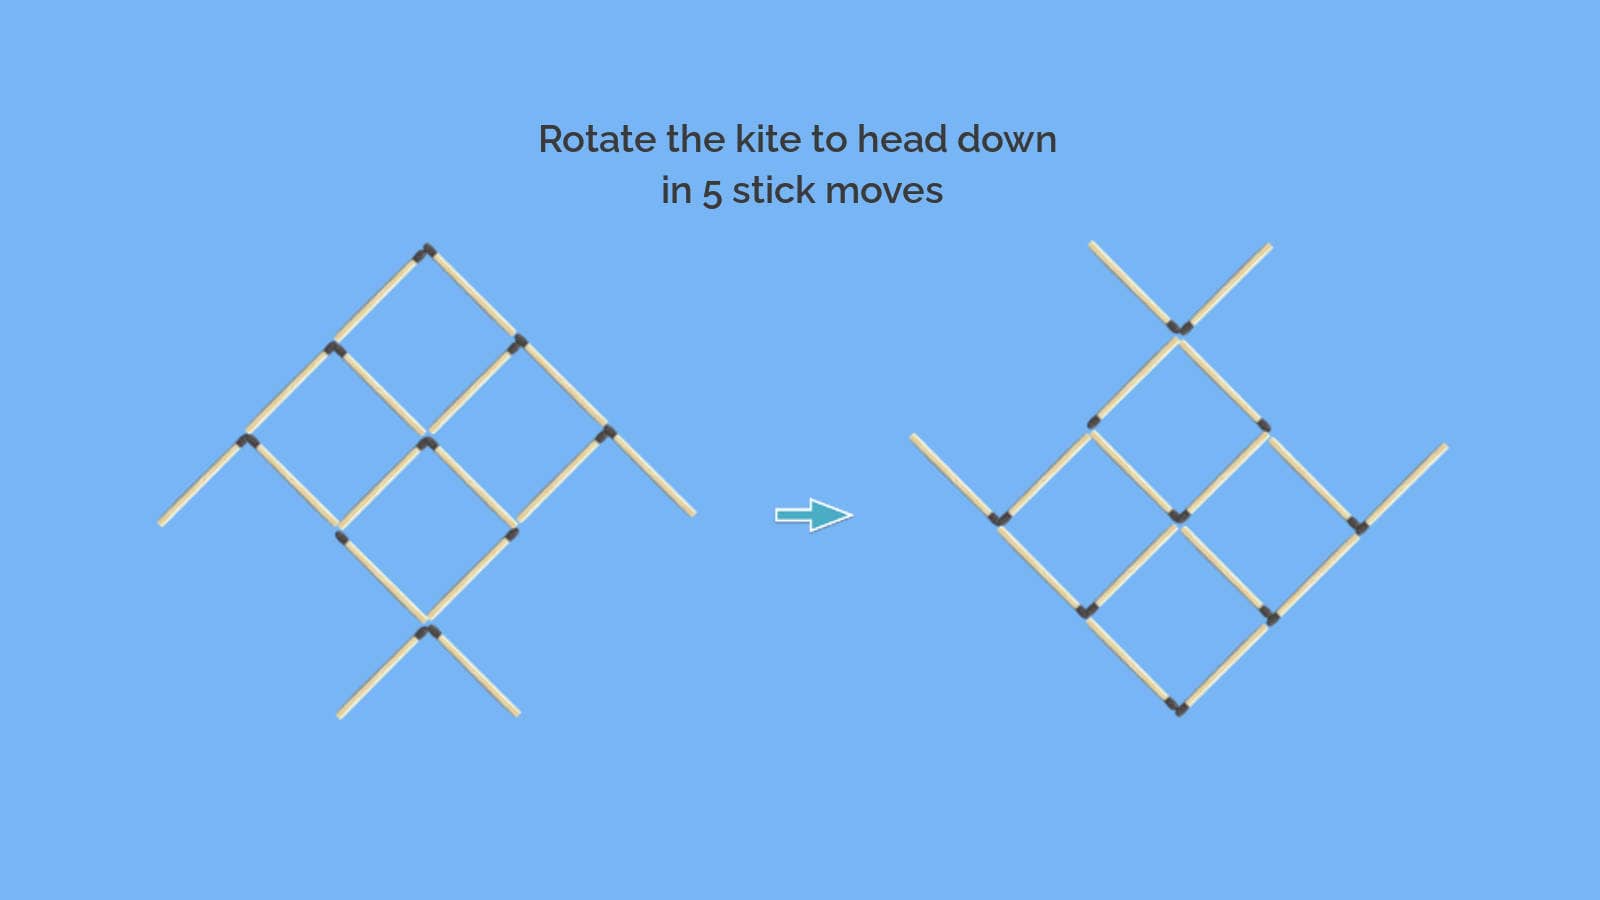 Kite matchstick puzzle: Move 5 matches to make the kite dive down